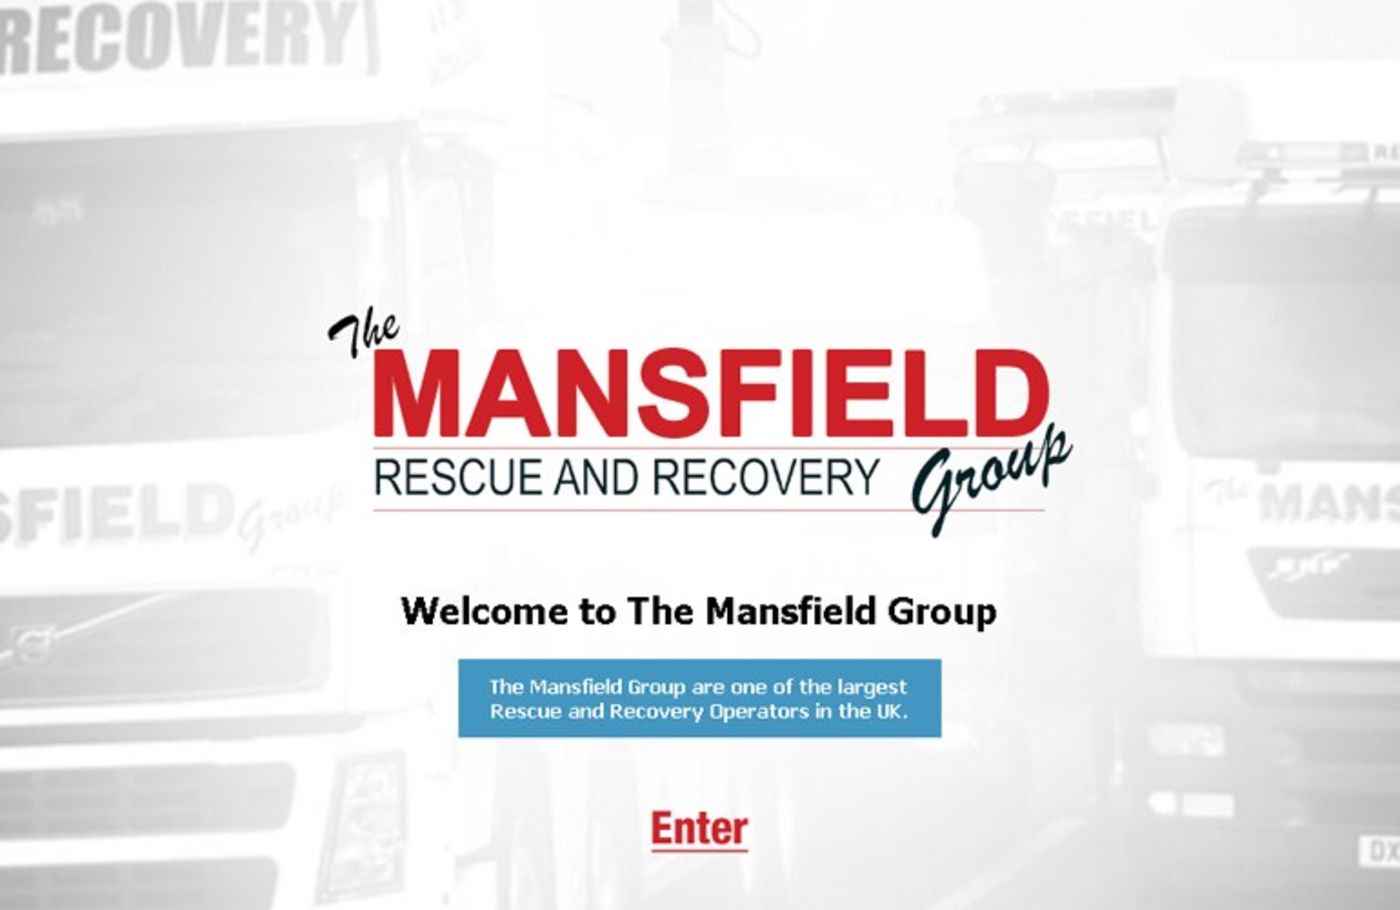 The Mansfield Group Welcome